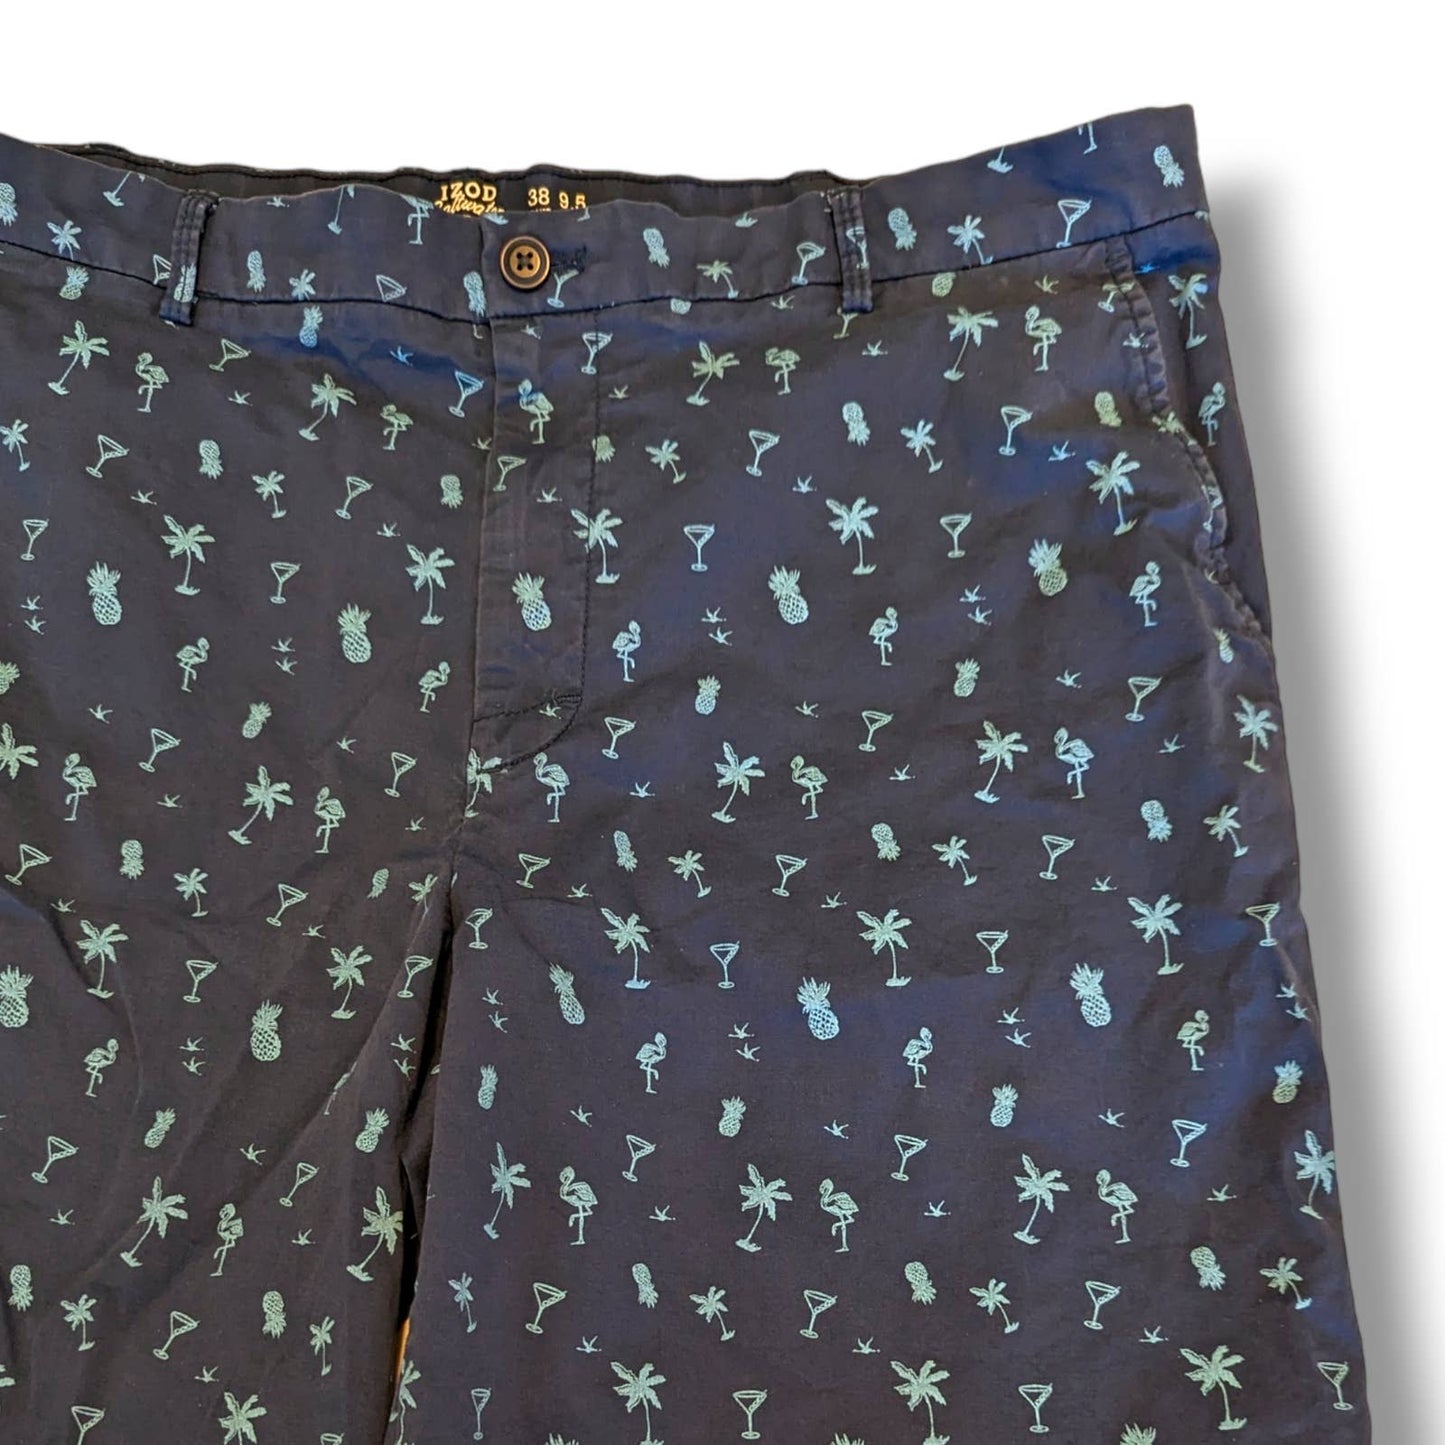 IZOD Navy Blue Pineapple Shorts with Cocktail Drinks Summer Vacation Golf